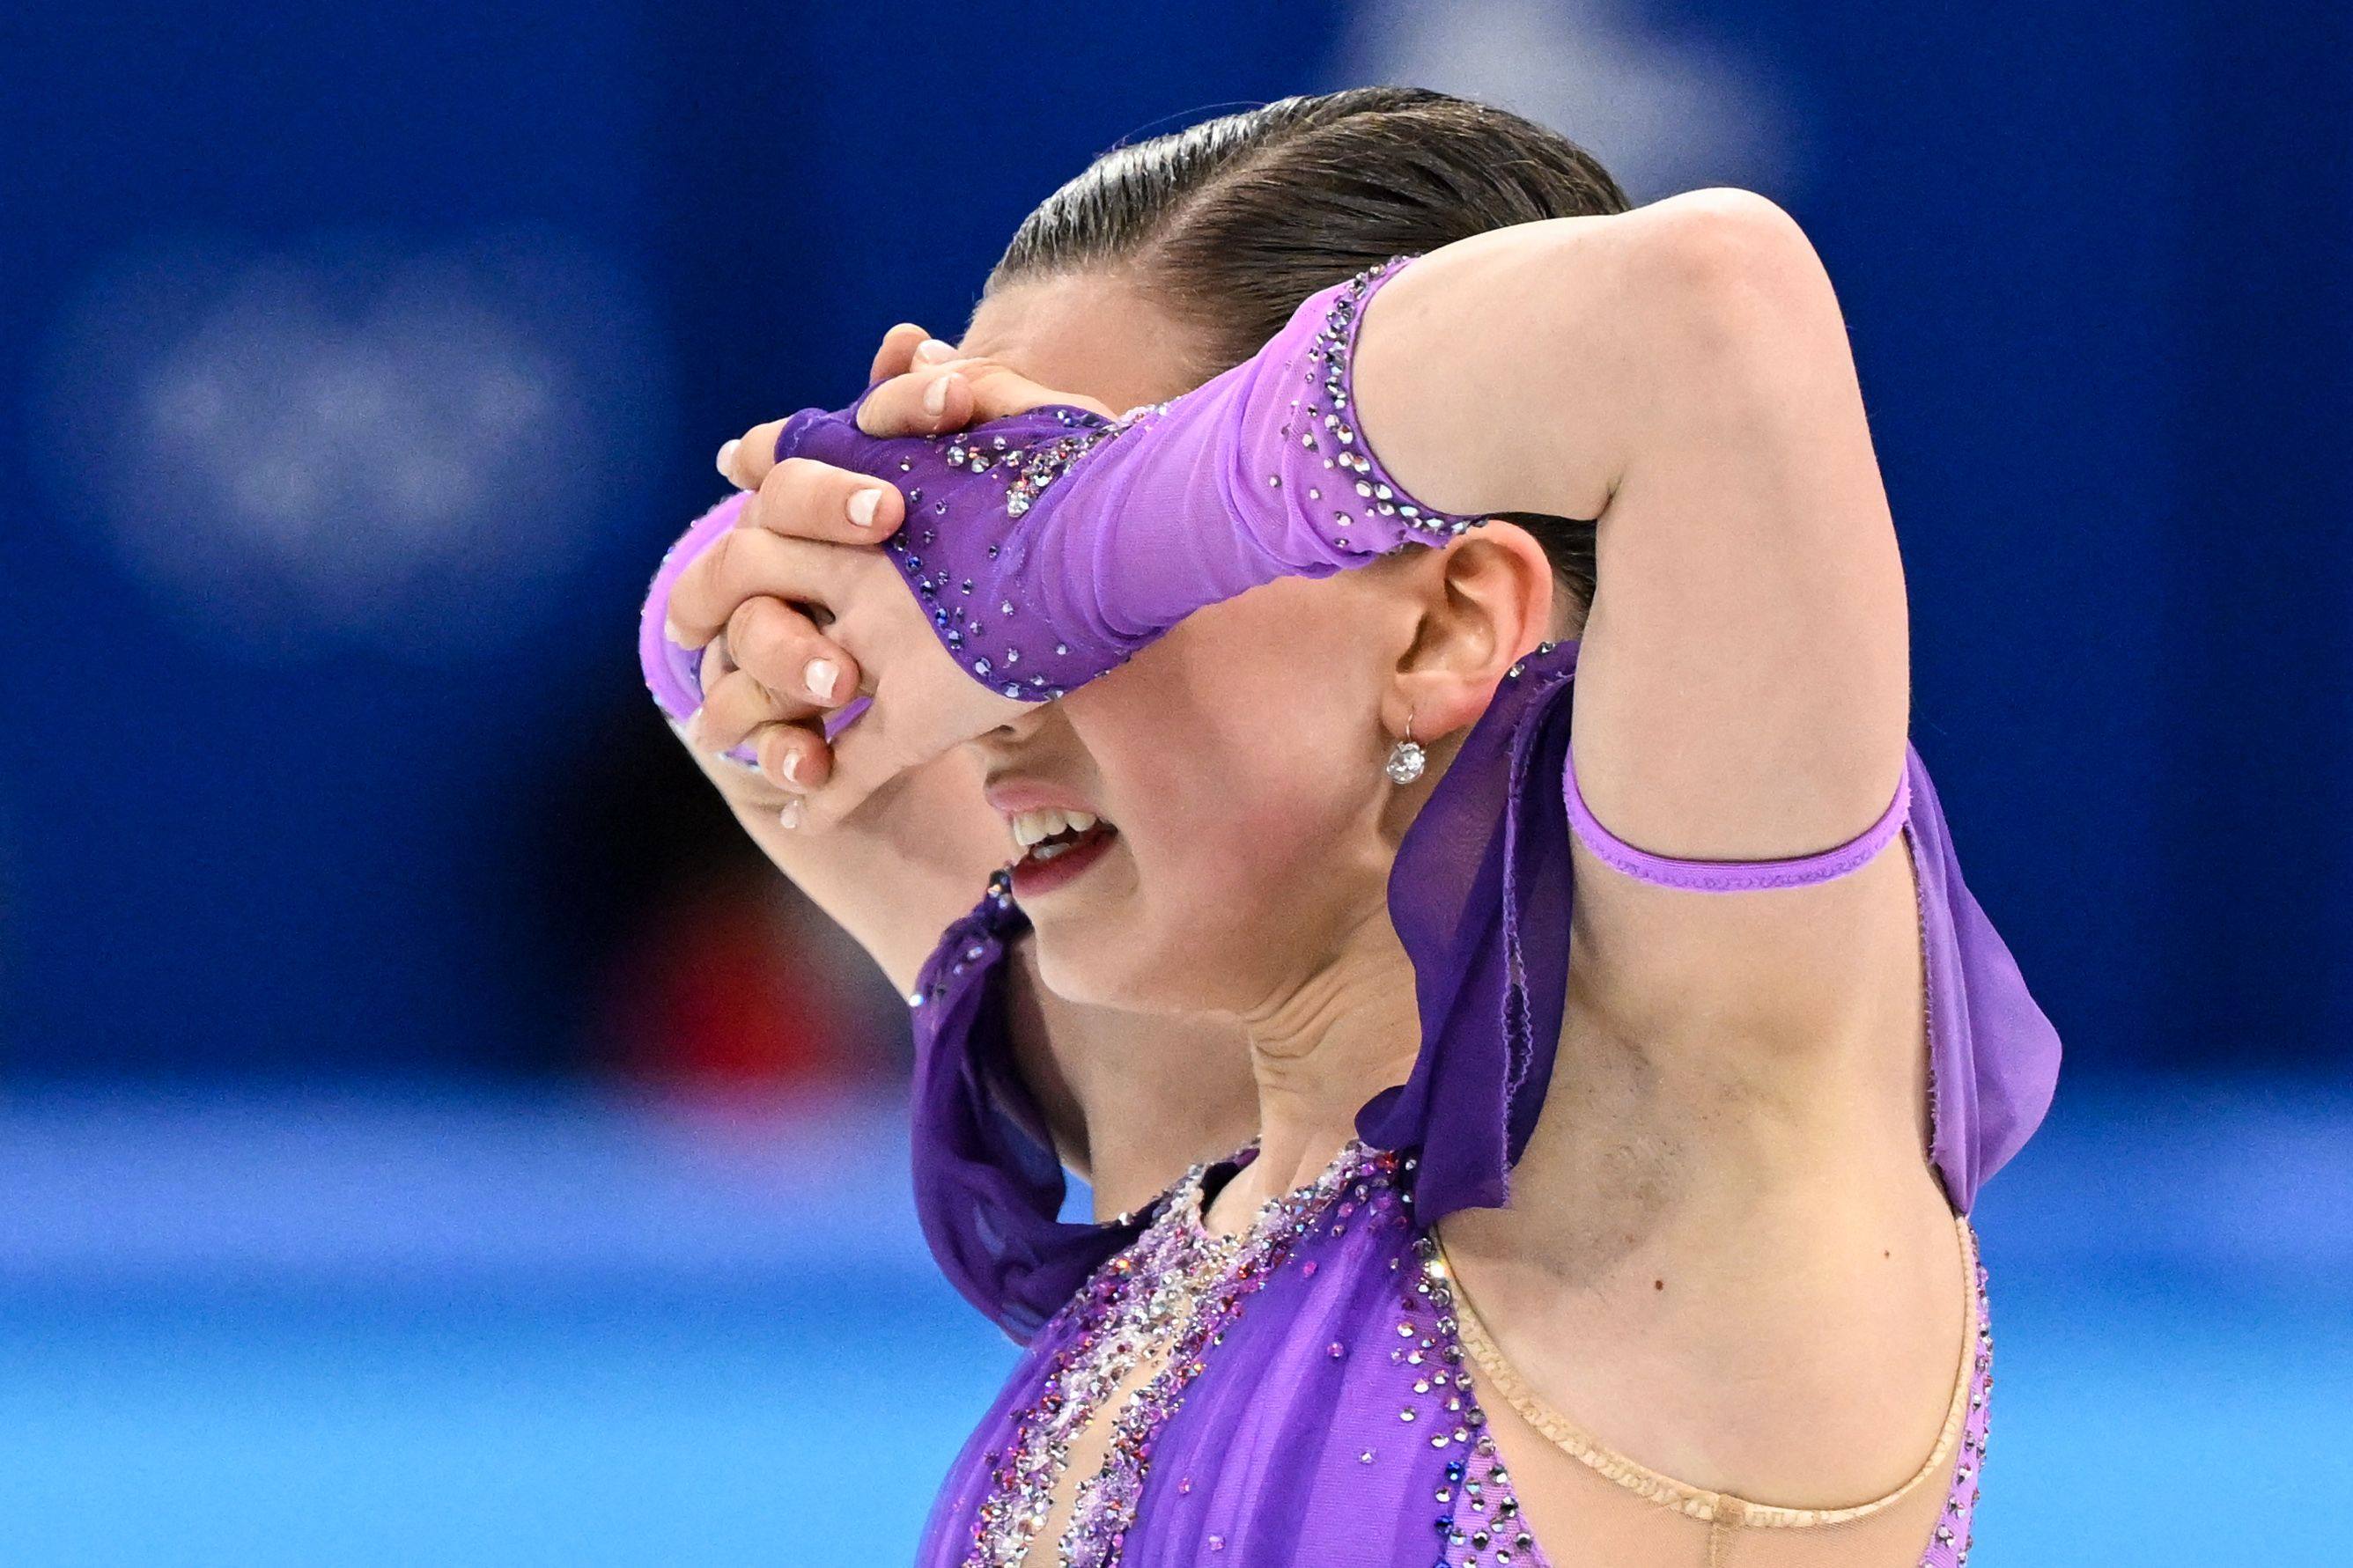 Russia’s Kamila Valieva reacts after competing in the women’s single skating short programme Beijing Winter Olympics. Photo: AFP